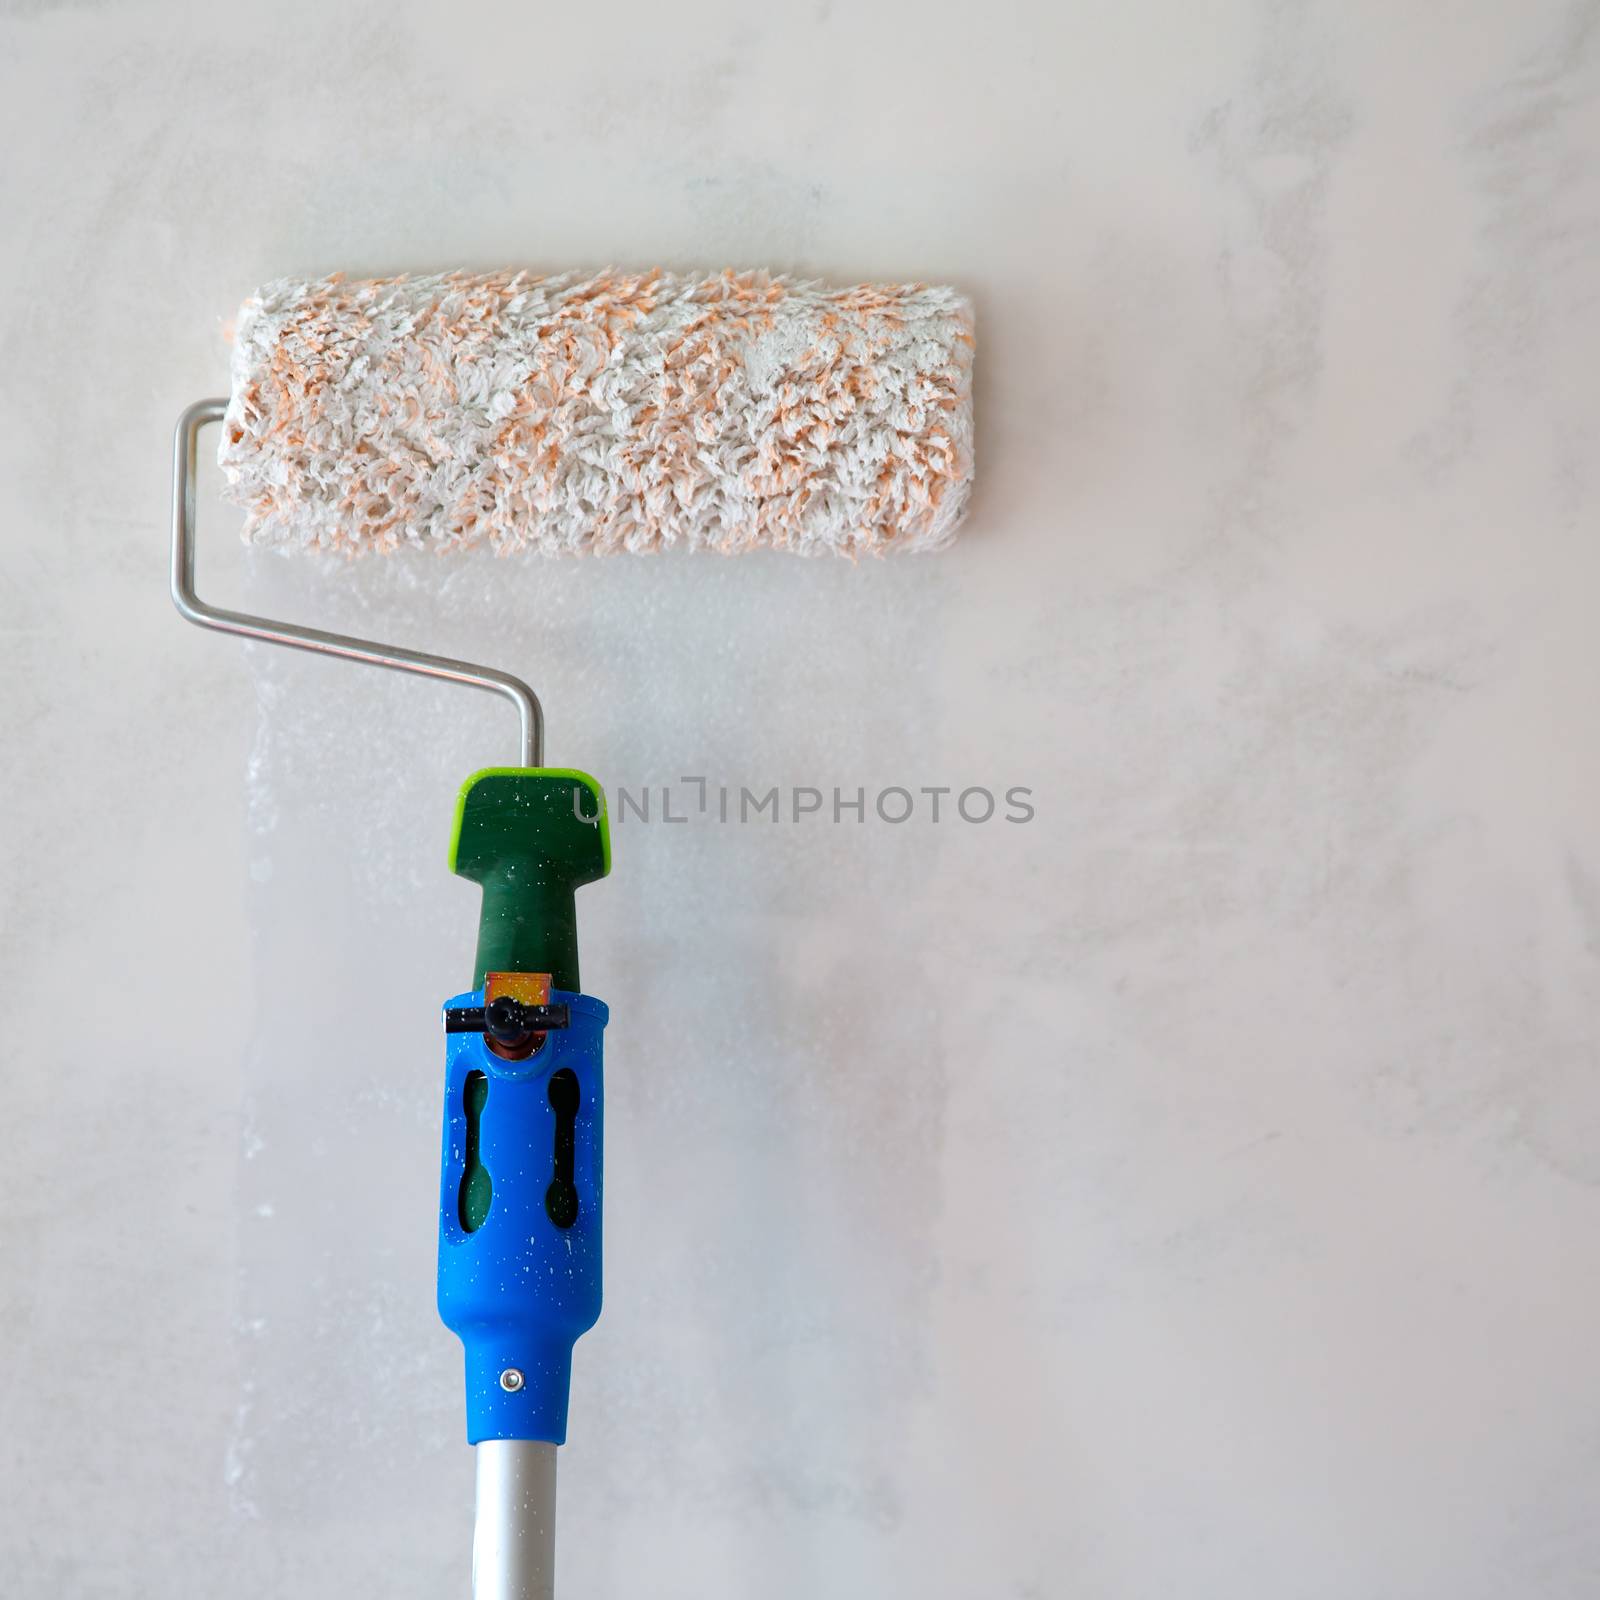 Paint roller for painting wall after plastering by lunamarina